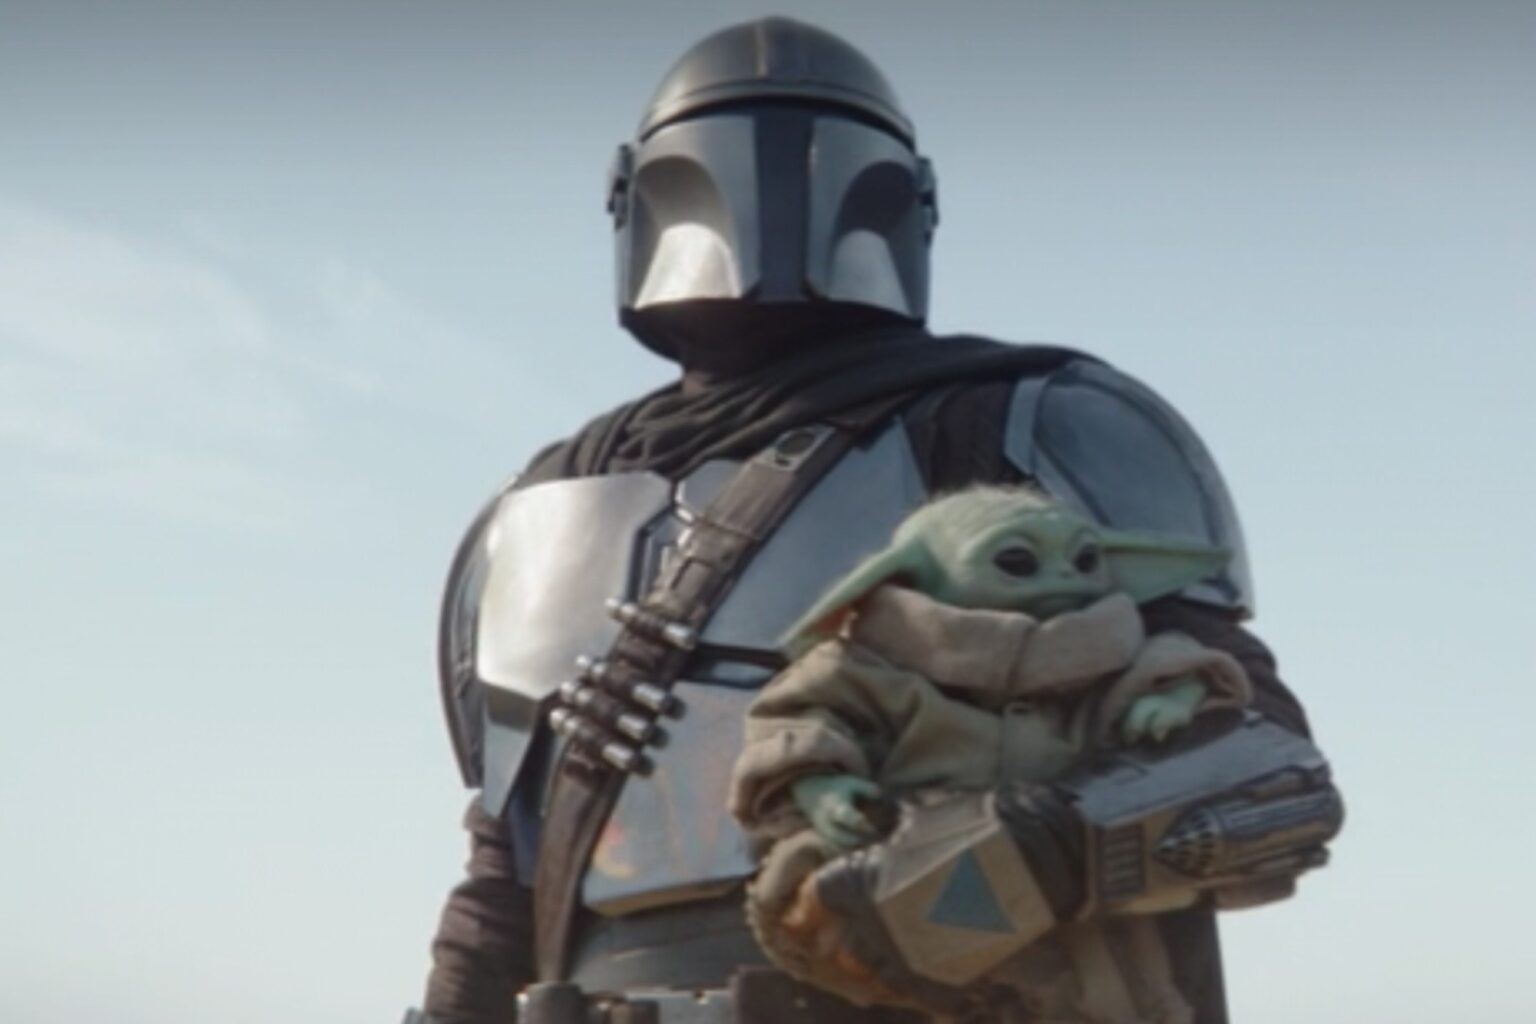 'The Mandalorian' has concluded its second season. Discover all the bizarre event that occurred during the season 2 finale.